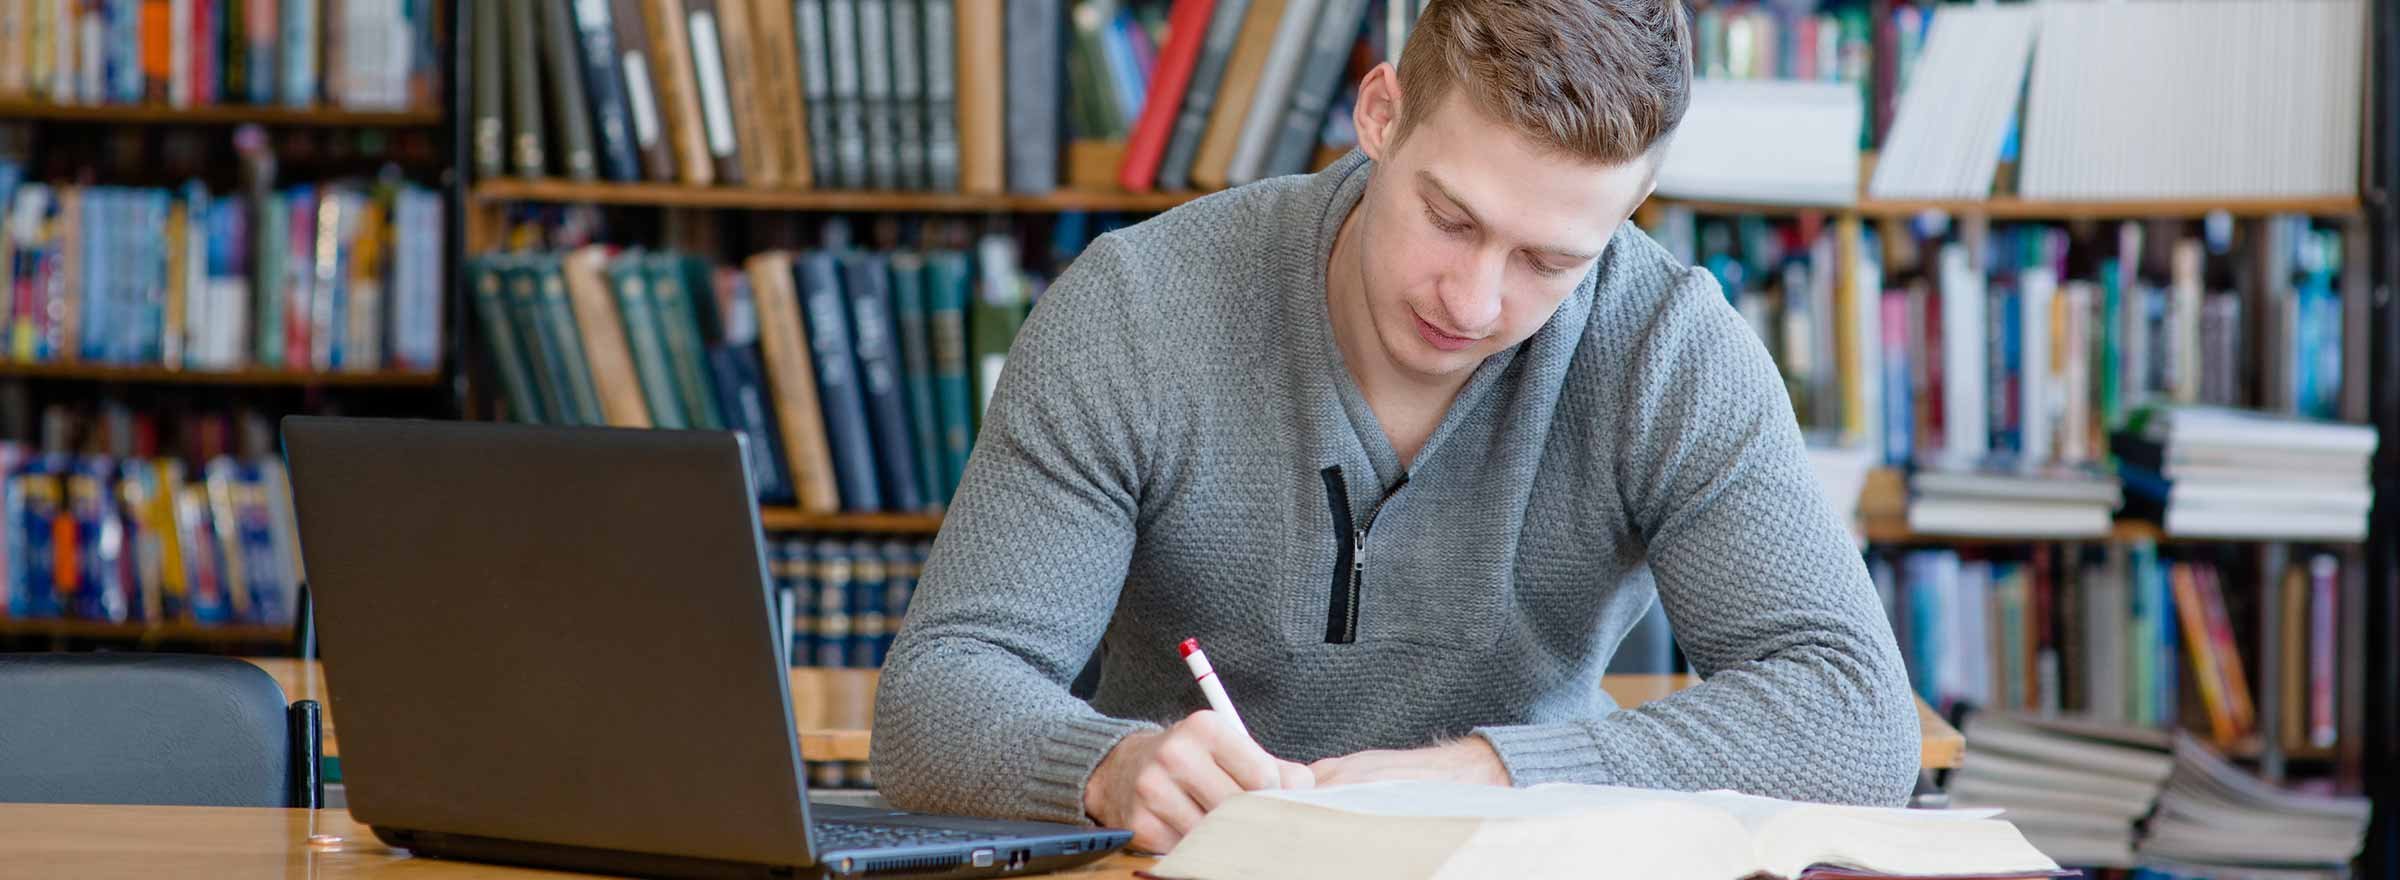 man in library using paper notes and a laptop